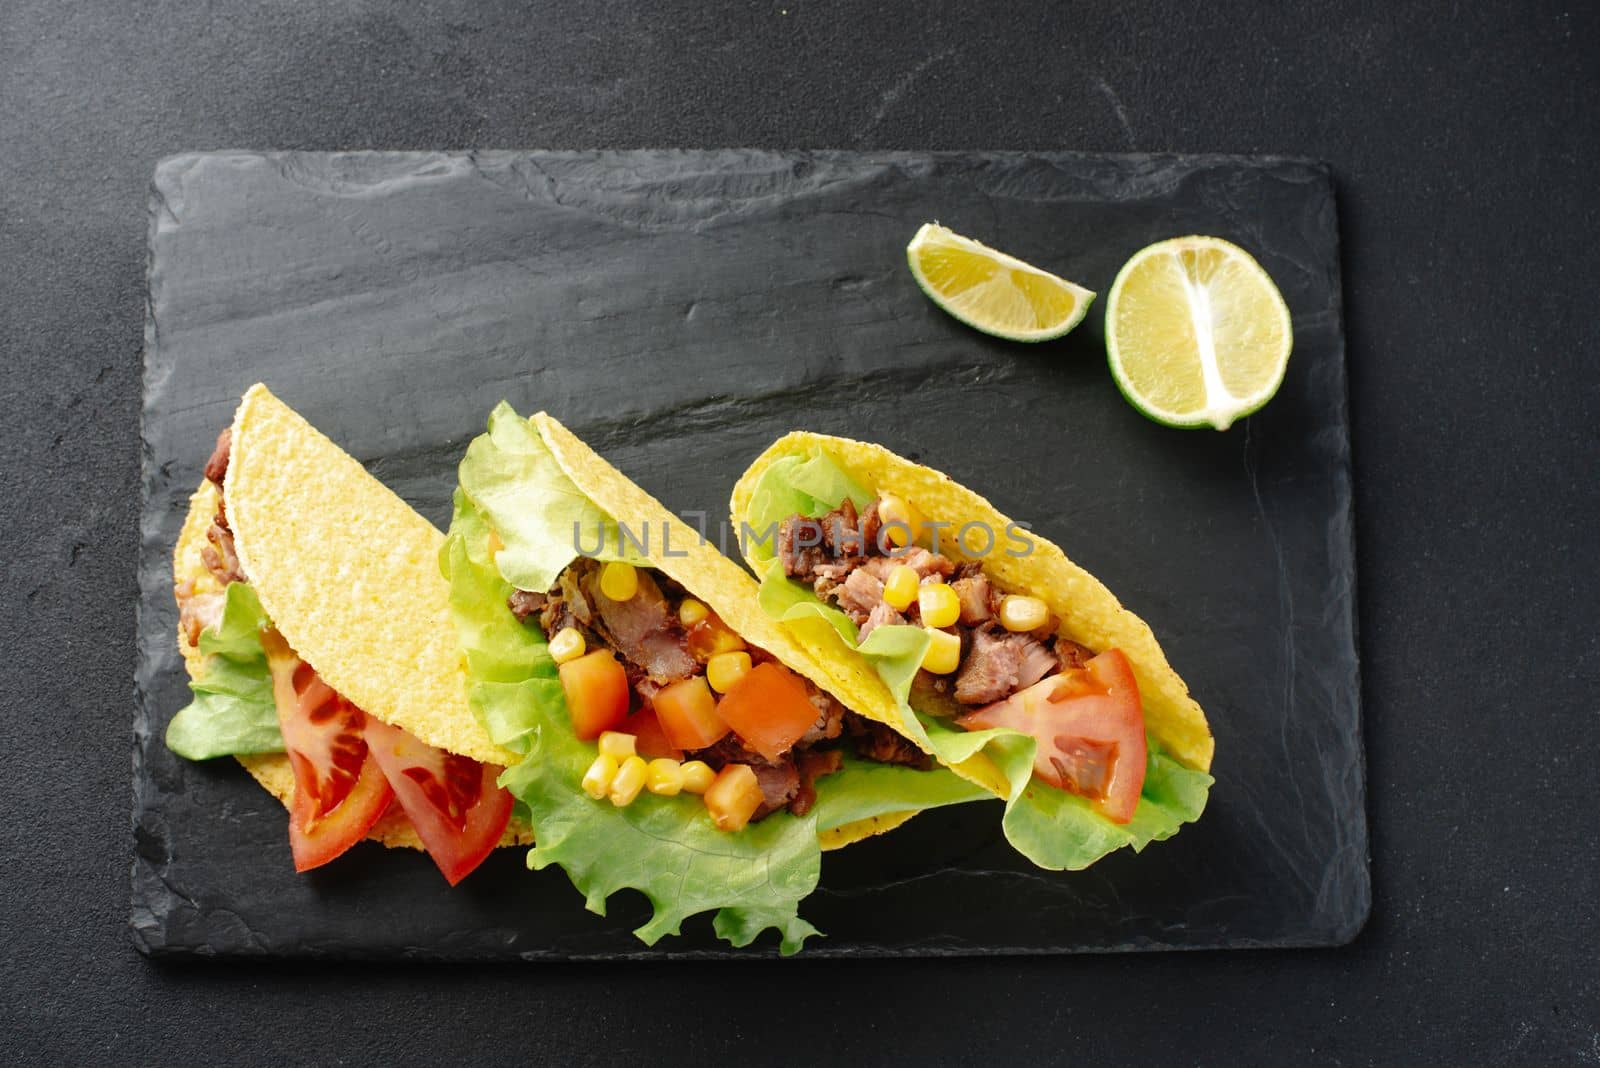 Mexican tacos with beef, vegetables and salsa. Tacos al pastor on a wooden board on a black background. Top view with copy space.